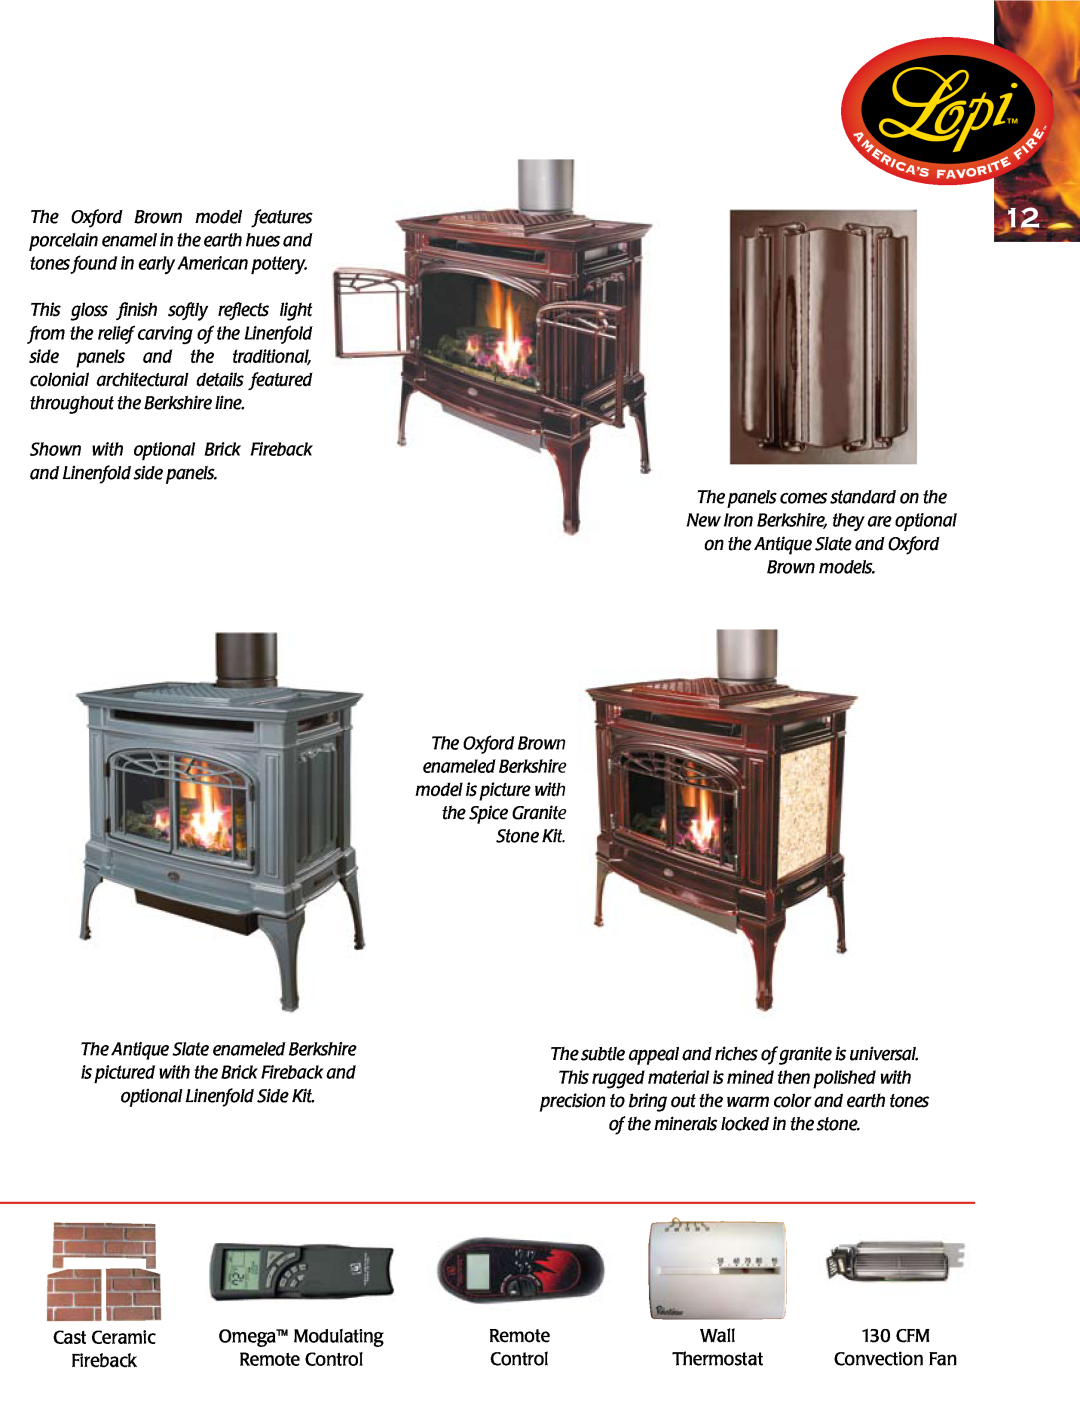 Lopi Gas Stove And Fireplace manual The Oxford Brown model features, porcelain enamel in the earth hues and, Brown models 